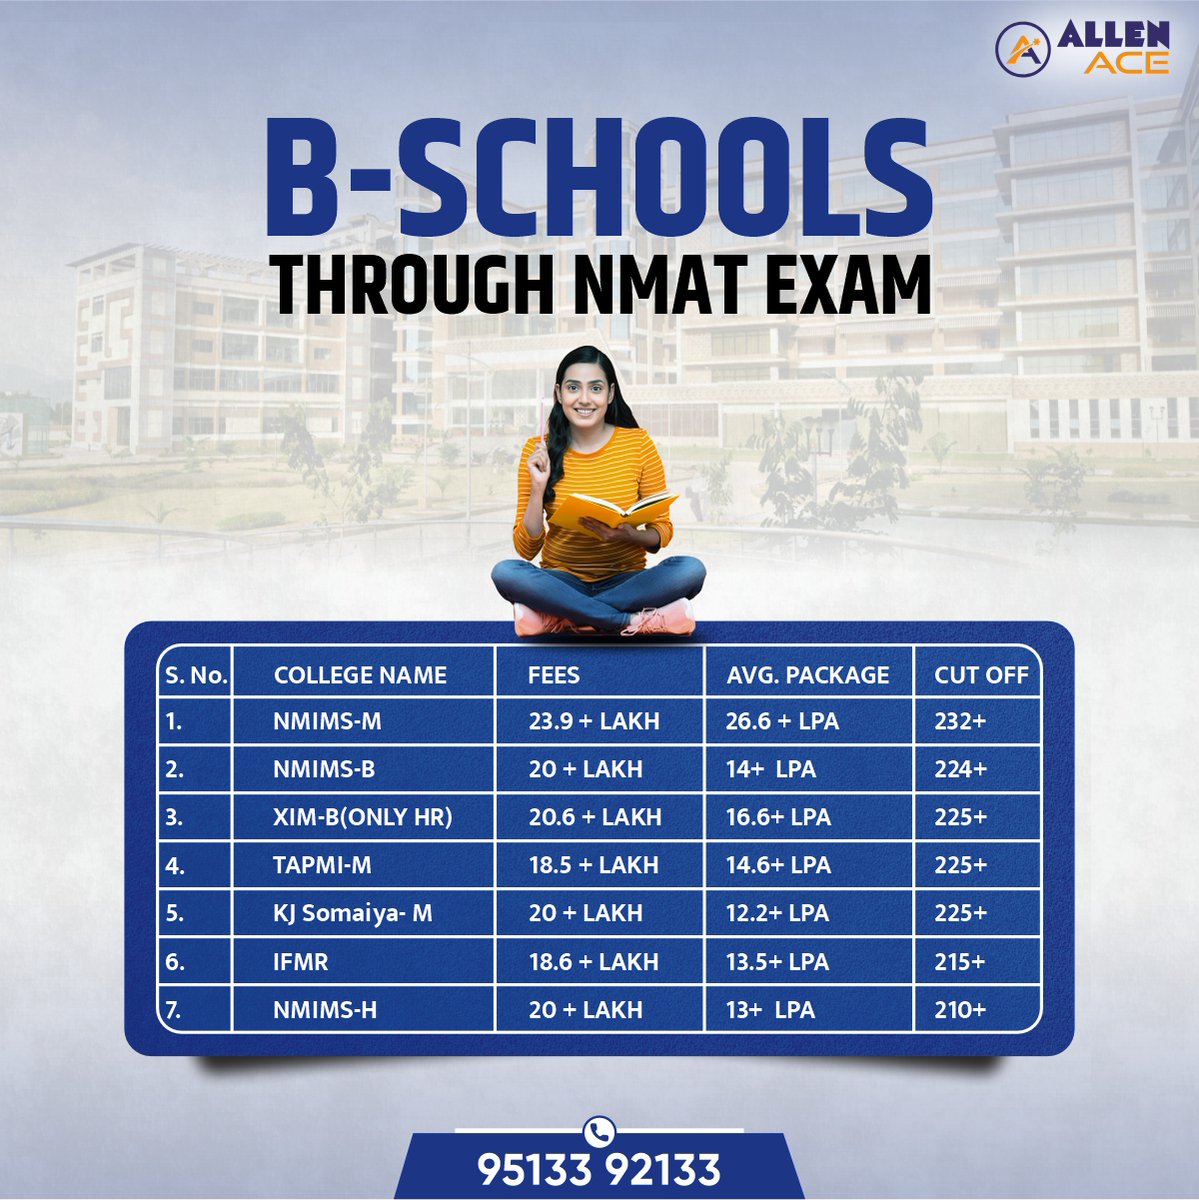 ➡️ Top colleges through NMAT - Fees, Placement and Cut-offs! Everything you need to know

#NMAT #mba2023 #mba #nmims #nmimsplacements #nmat2023
#ALLEN #ACE #ximb #mbaprep #mbacoaching #CAT
#catcoaching #nmat2023 #nmatprep #nmatpreparation